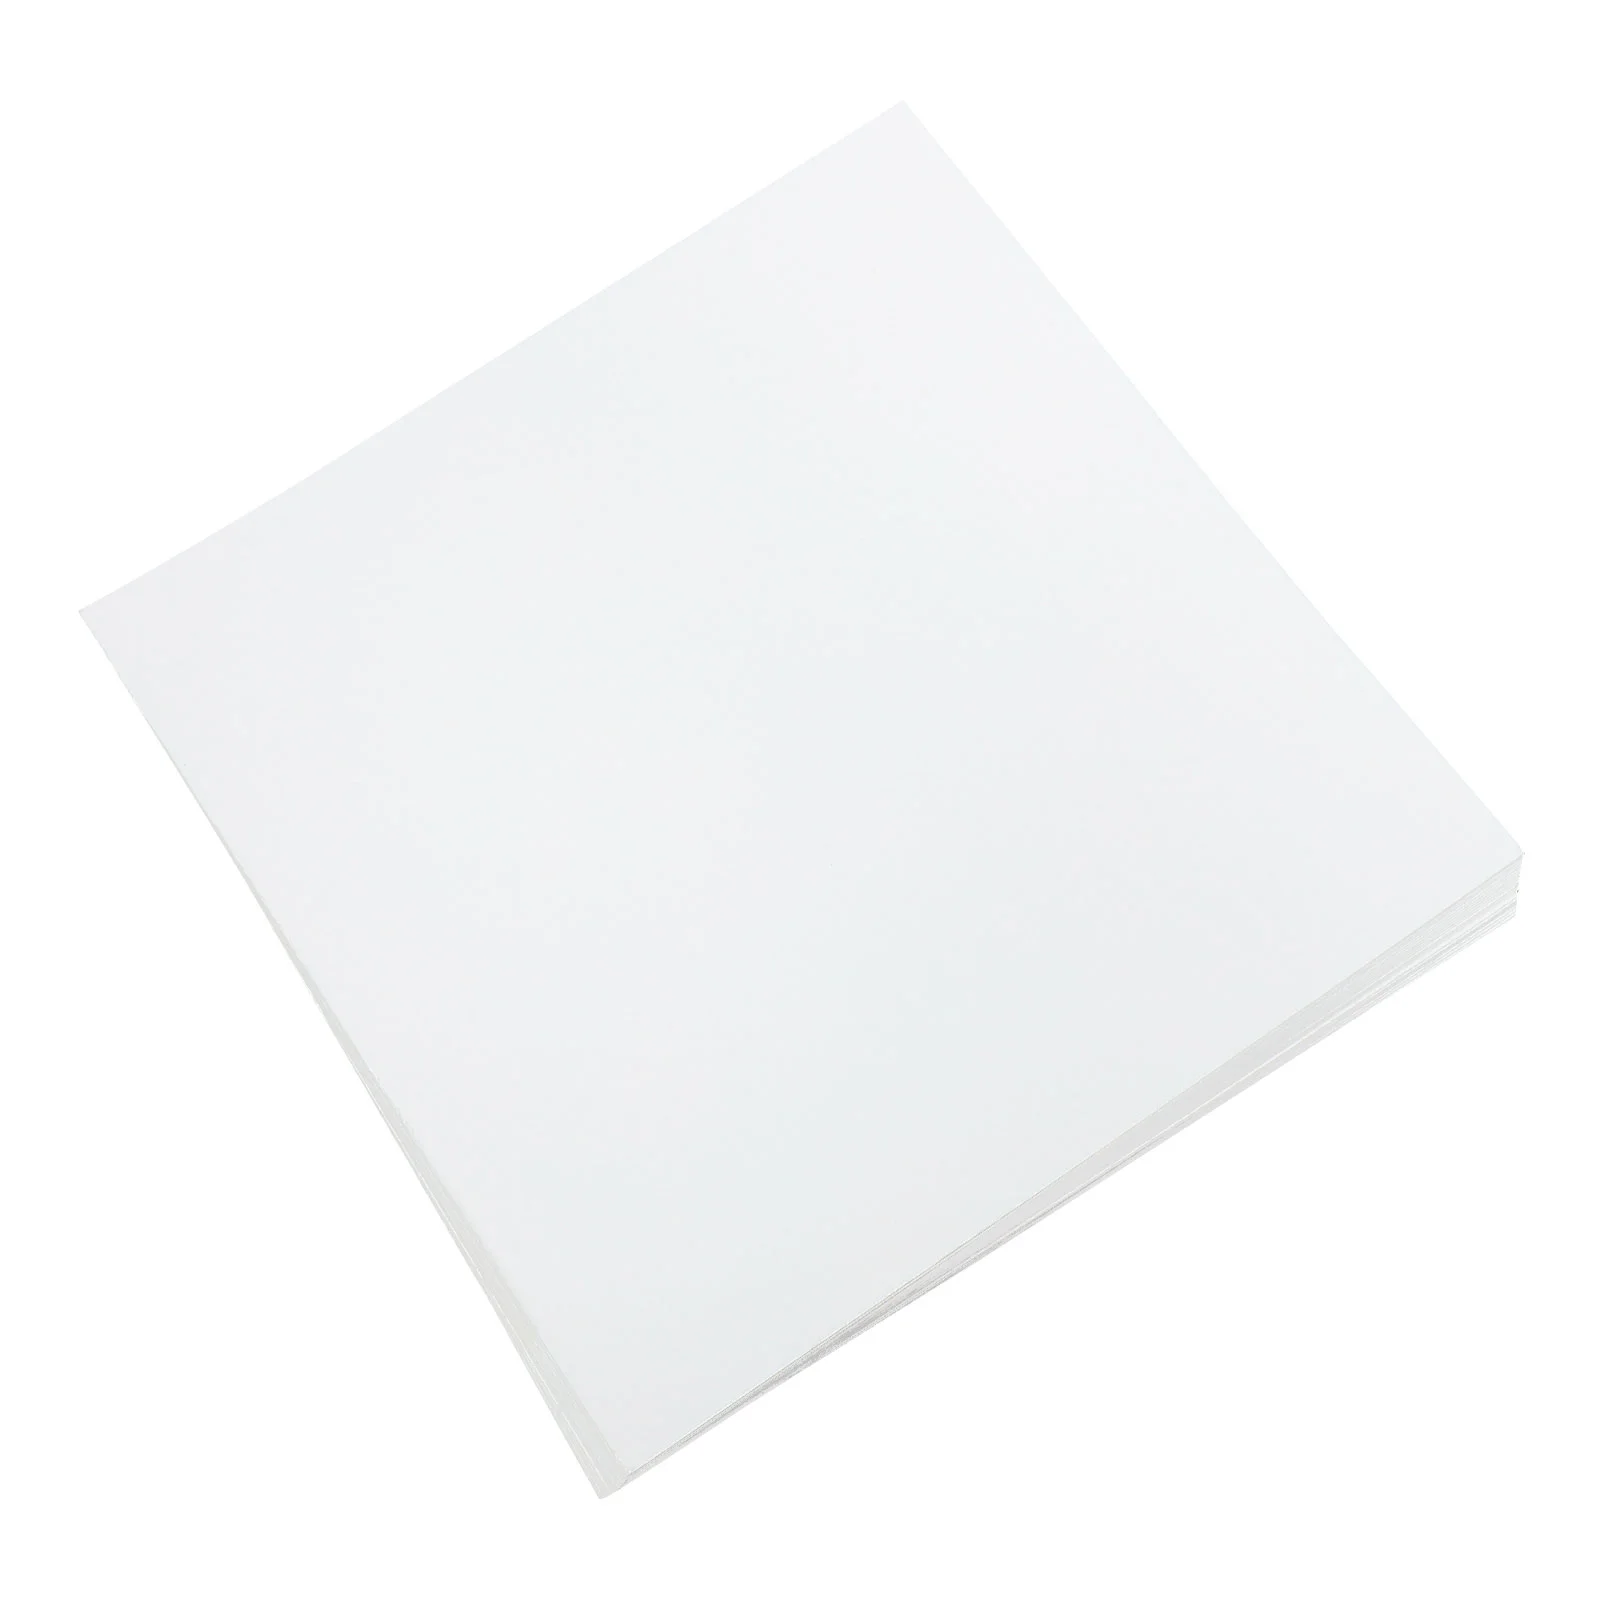 

30 Sheets Laboratory Filter Paper Experiment Papers Stickers Labs High Absorbing Absorbent Qualitative Filtering